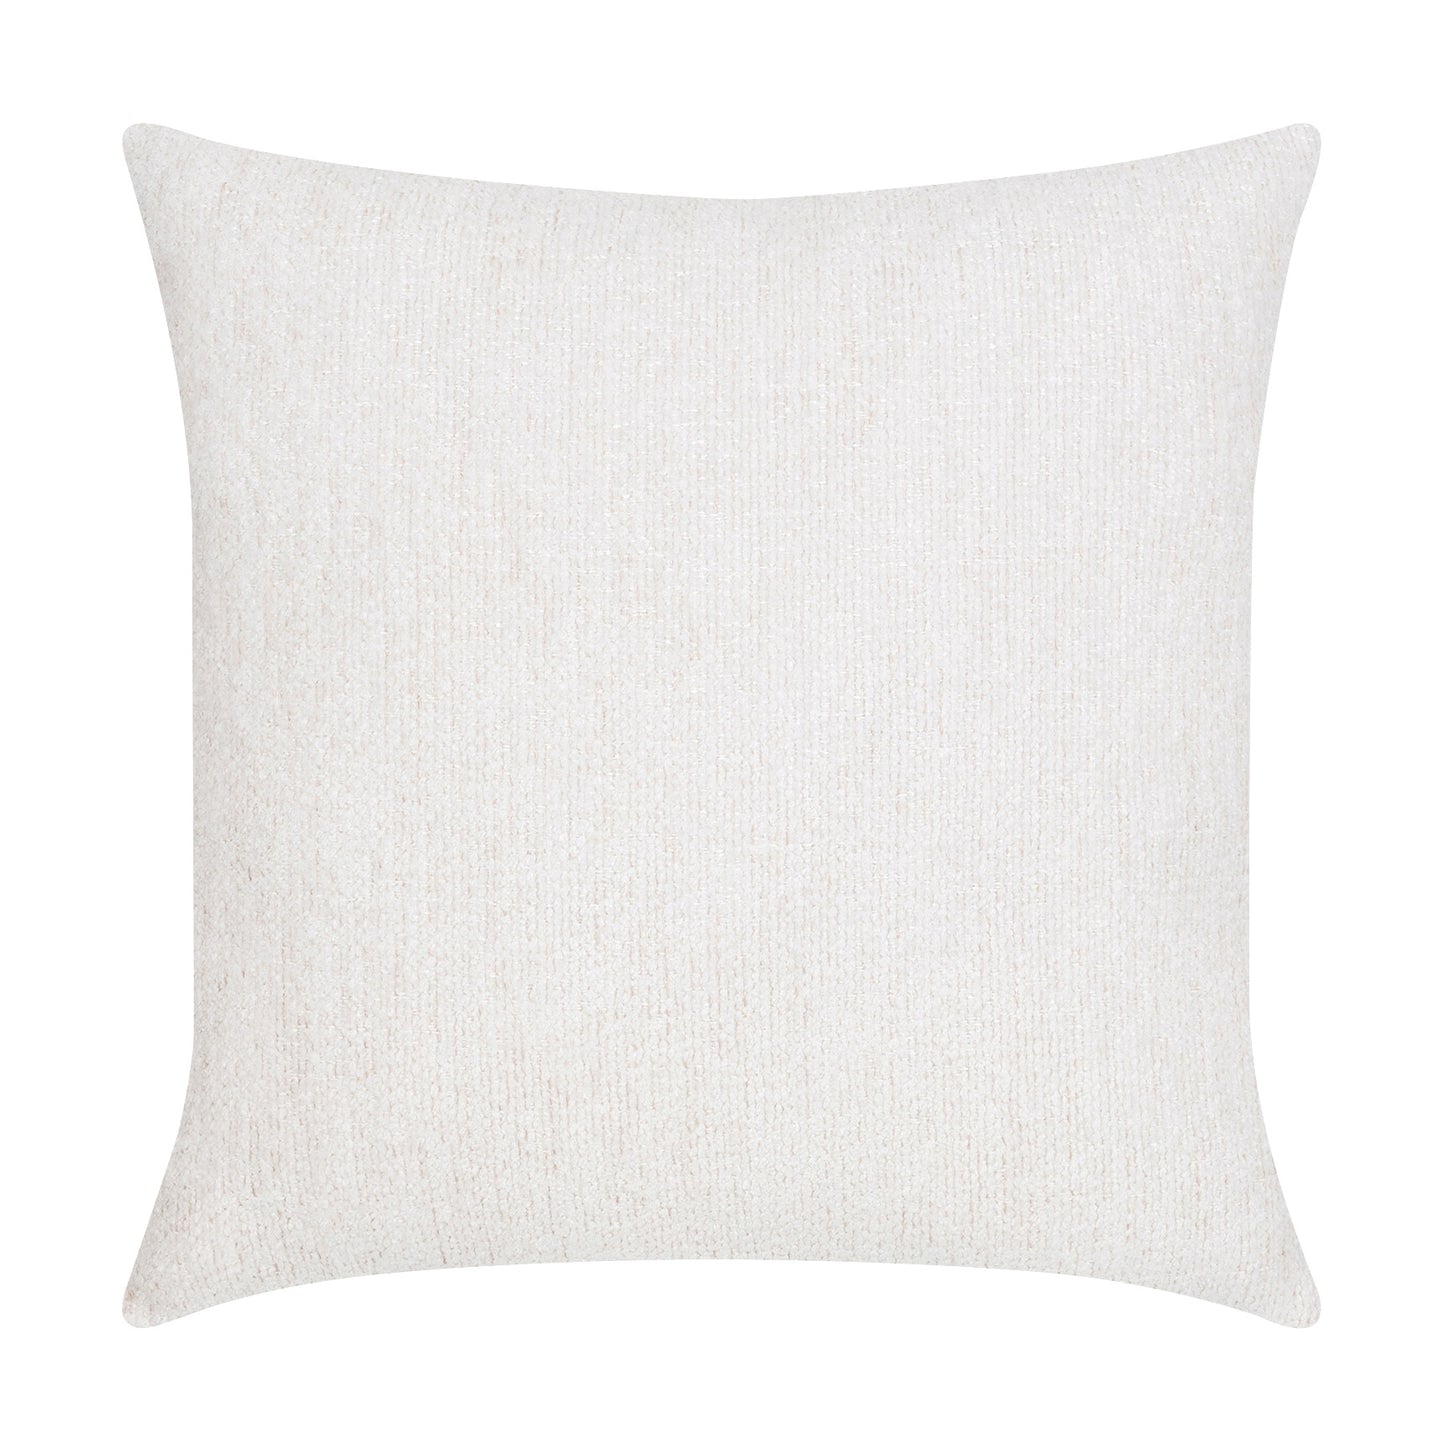 Elaine-Smith-20-Square-Pillow-Comfort-Oyster